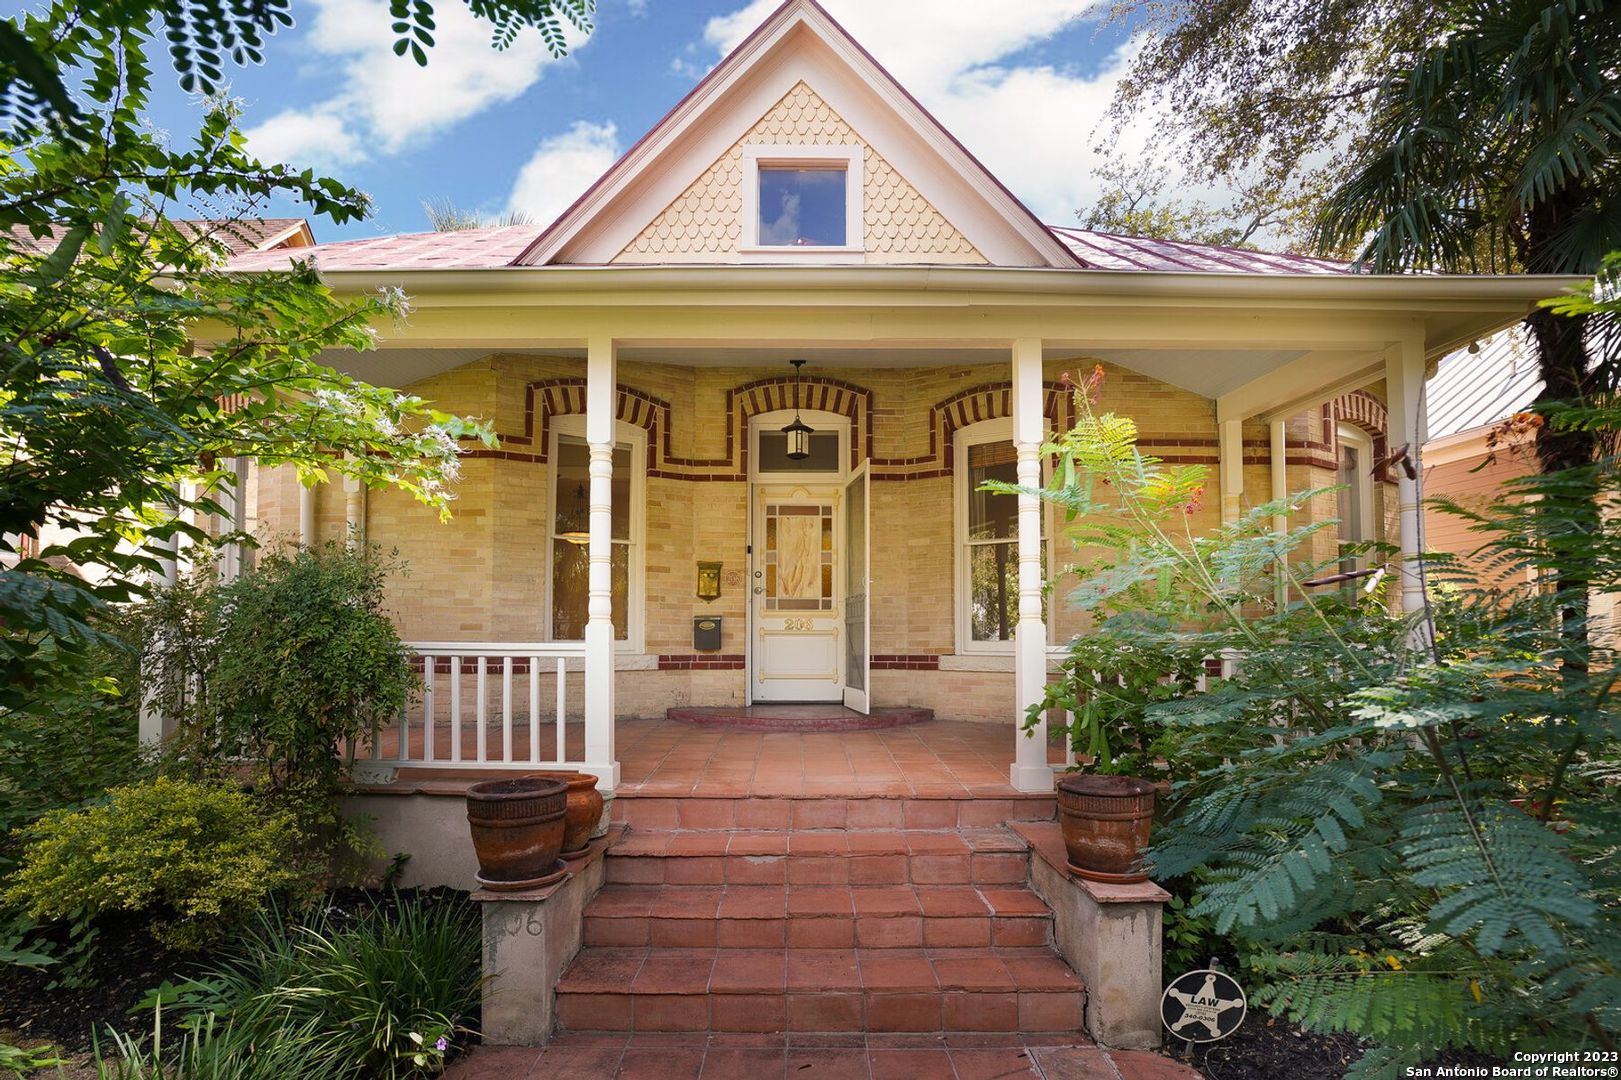 Nestled in the heart of the historic King William District, just blocks from the San Antonio River and Southtown restaurants and shops, this 1893 Victorian brick home boasts many unique features of the era. The stained-glass-accented front door with its original transom window welcomes you to an open entry way, bordered with floor-to-ceiling built-in bookcases. Gleaming, rare, long-leaf yellow pine floors throughout the first floor are the result of a recent renovation. Ultra-high ceilings, vintage molding and numerous light-filled large windows make this home warm and inviting. The updated kitchen features gas cooktop, elevated dishwasher for easy access, soapstone counter tops, custom cabinetry, and lighted hanging pot rack. A free-standing claw-foot tub, walk-in closet and glassed-in steam shower are included in the second floor en-suite, completed in 1996. The back deck and yard feature tall fences and beautiful loquat trees for privacy. One of the few homes in the area with alley access and off-street parking for entry from the rear. The two air conditioners have been replaced within the past three years along with the smart thermostats. Cast iron Hunter ceiling fans are installed in many rooms to keep the home comfortable during the warmer months. Comes with city-approved, architect-designed plans for a two-story carriage house and garage for construction off the alley. Experience the best of San Antonio in a vibrant neighborhood that offers so much being within minutes to some of the best dining, breweries, Hemisphere Park, Downtown, boutiques, Blue Star Arts Complex, Mission Reach, and Southtown.